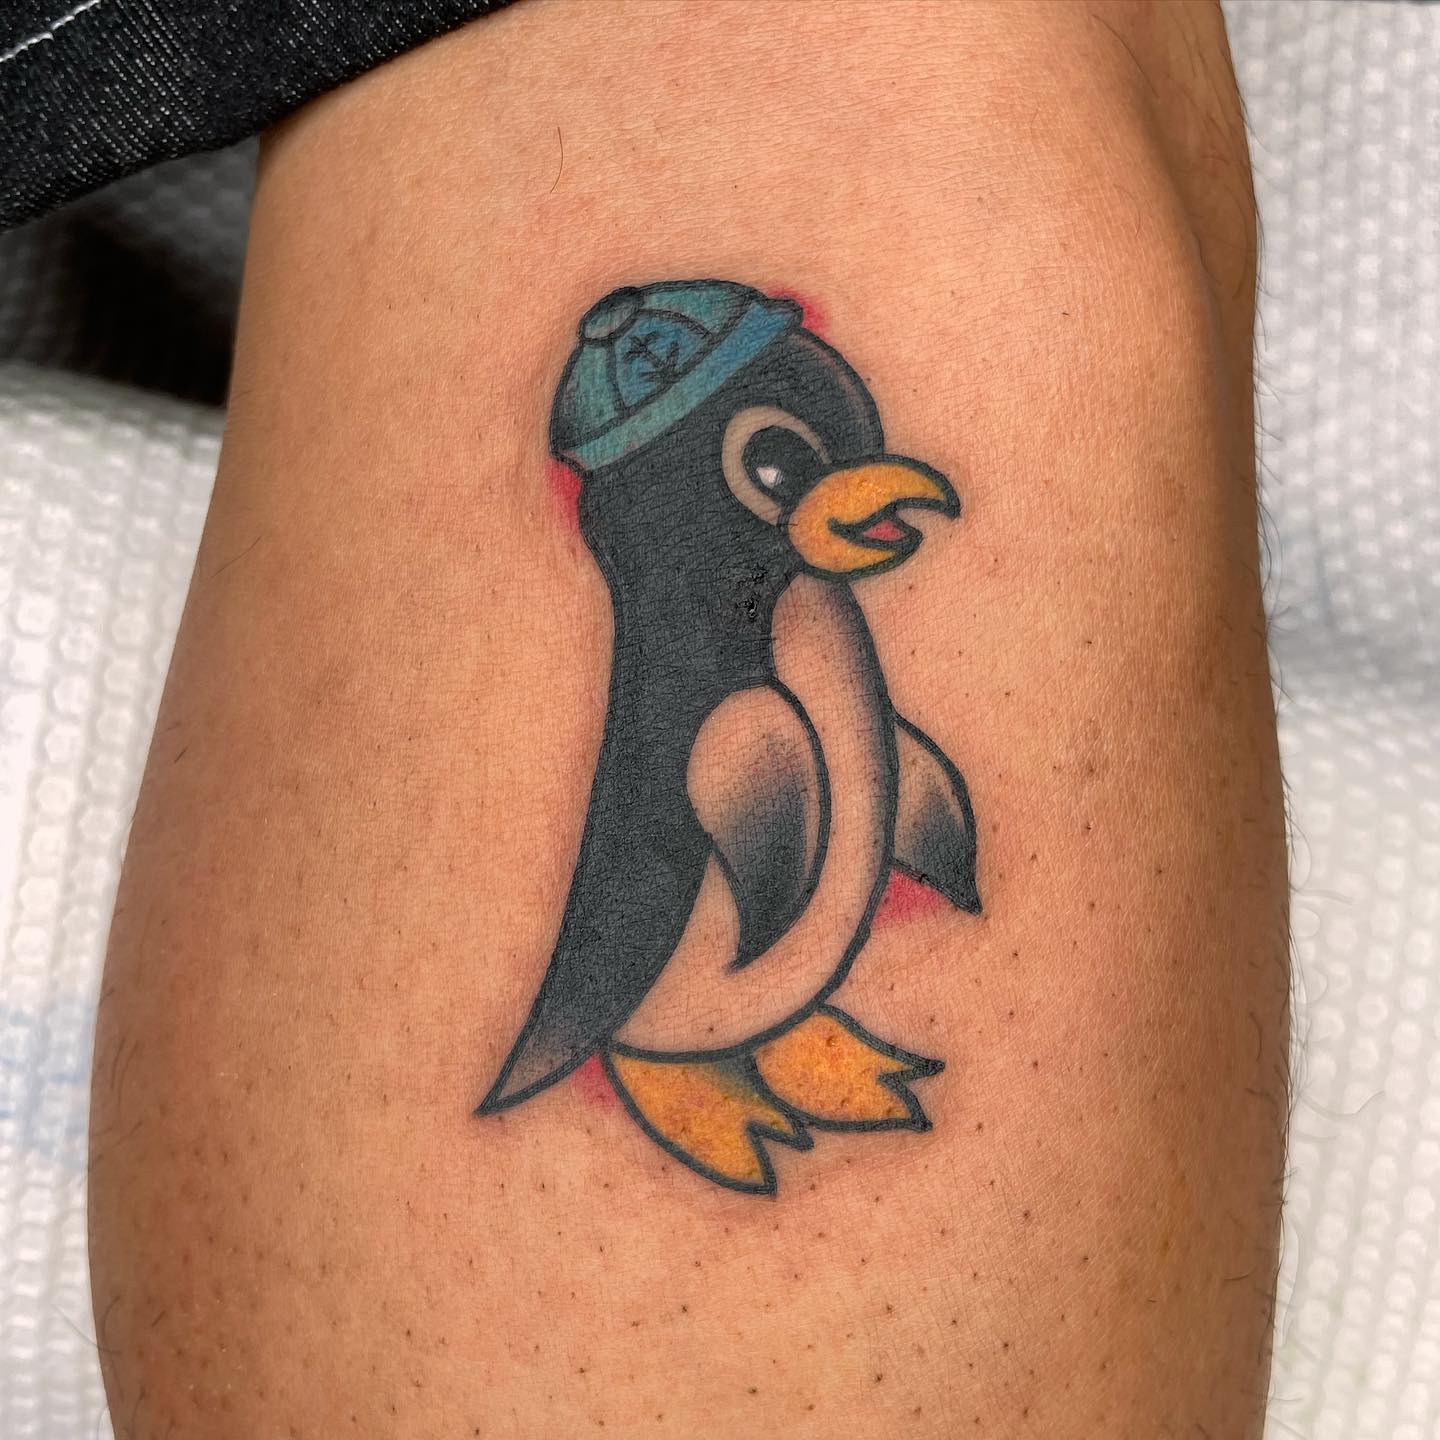 A little and cute sailor penguin is all you need to smile. If the size of this tattoo is too big for you, you can get a smaller one of it.